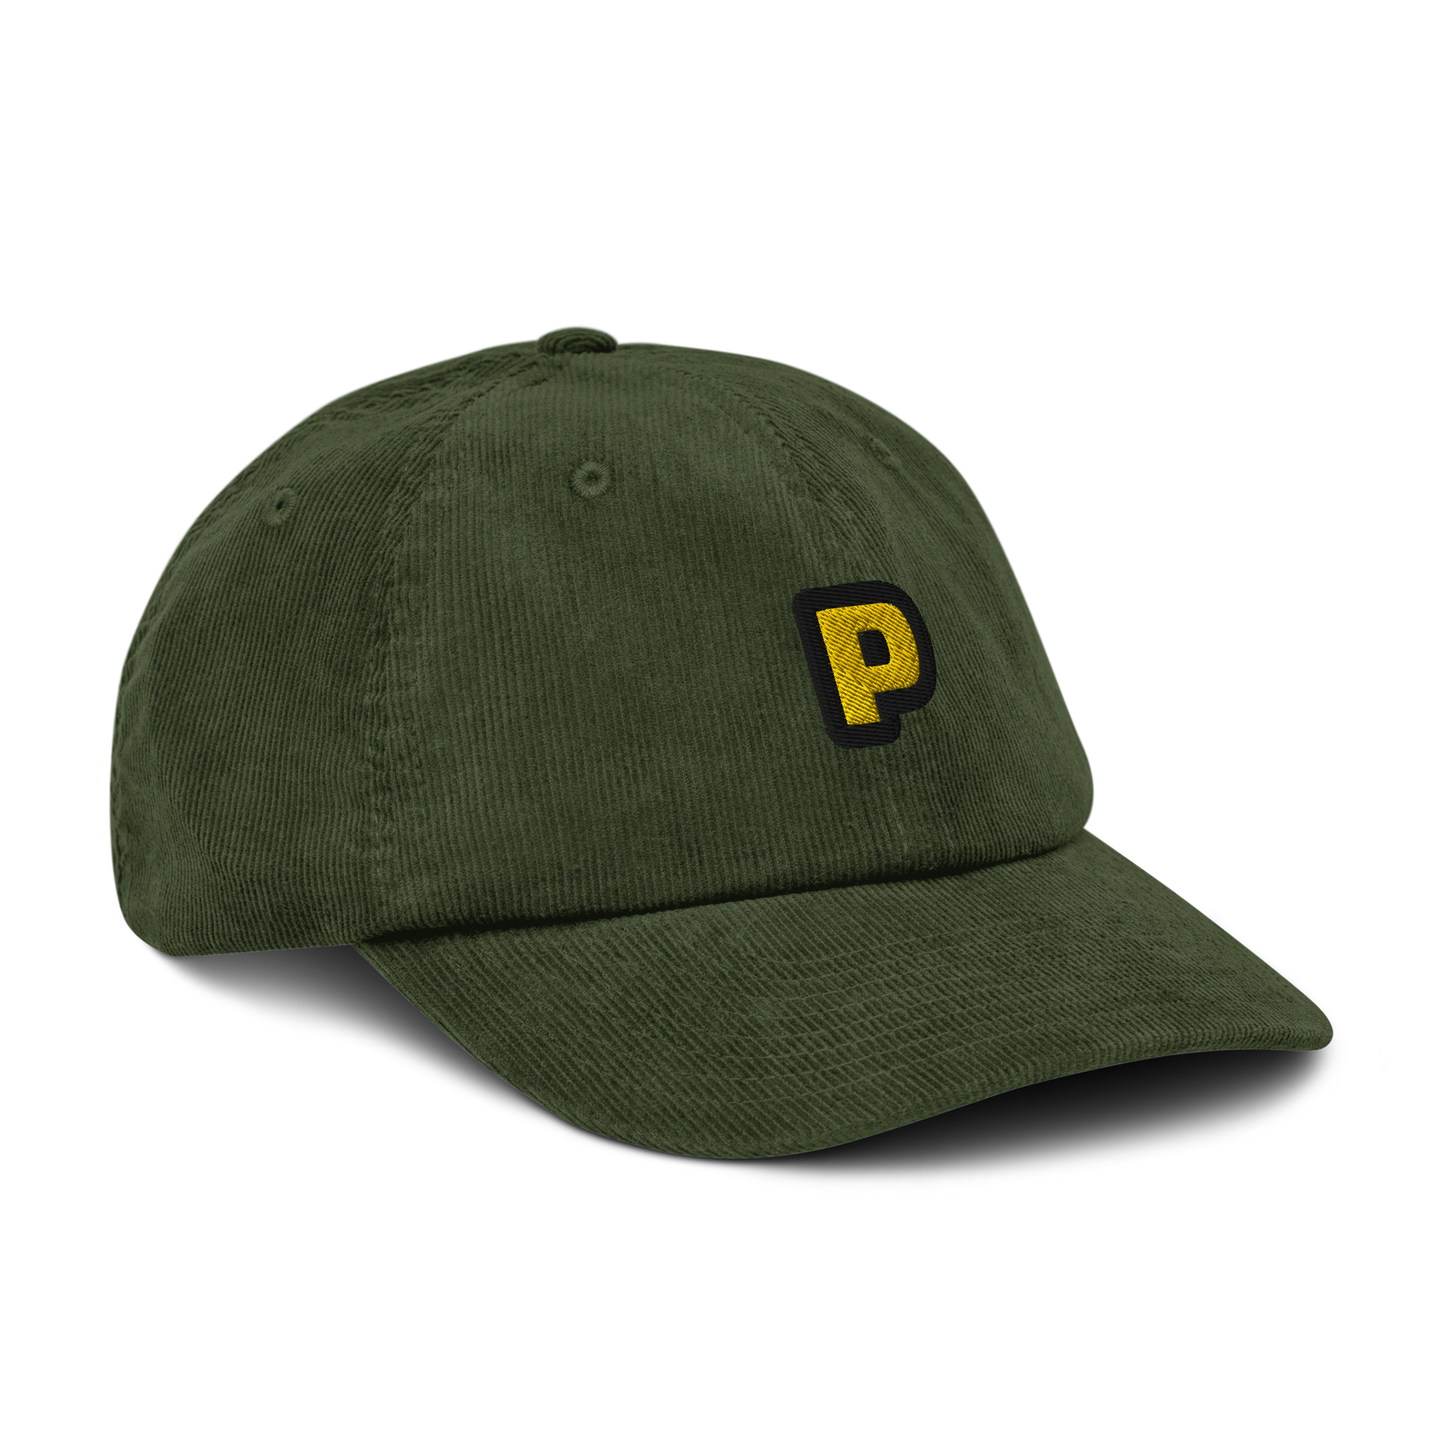 P - The letter collection - Corduroy hat